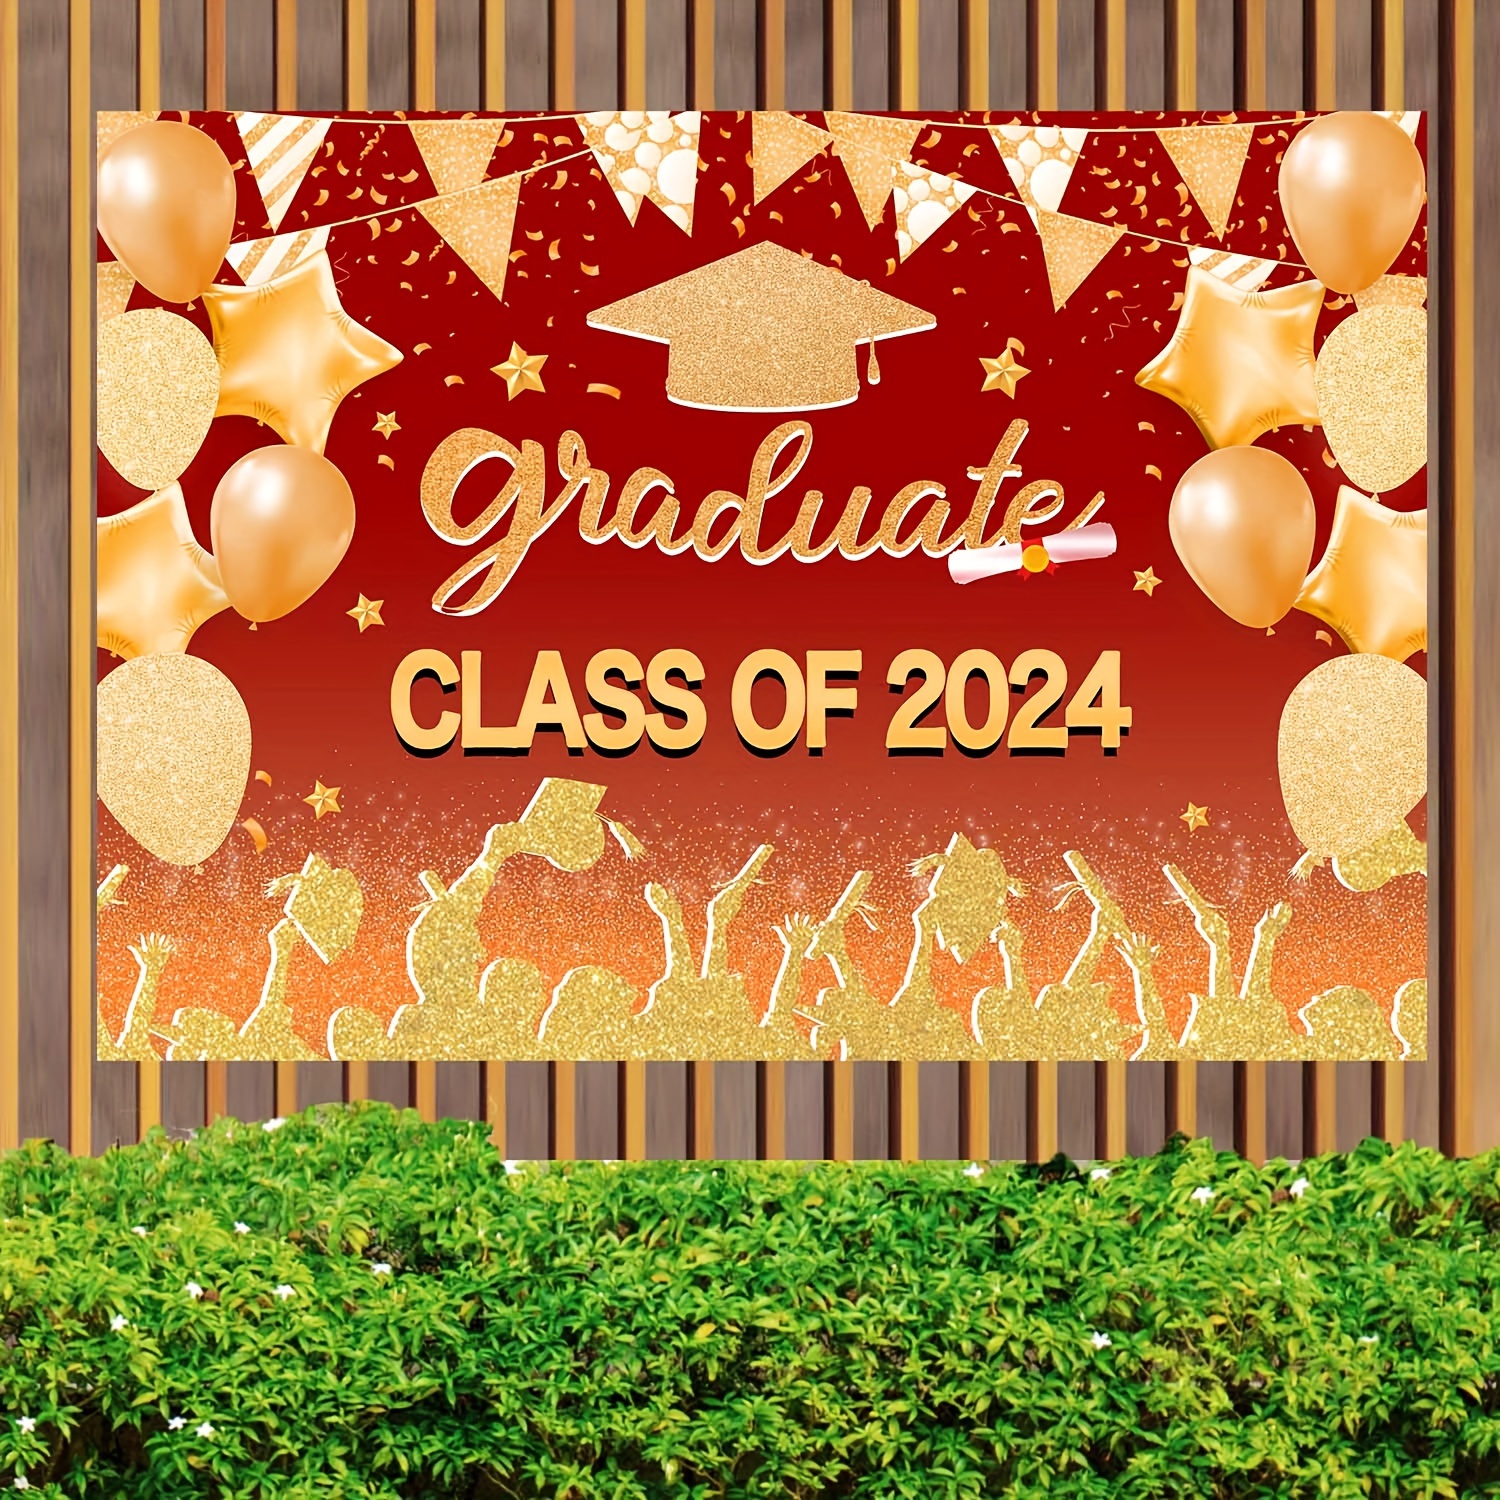 2024 Graduation Decorations, Graduation Decorations Class of 2024, Red and  Black Graduation Party Decorations with Congratulations GRADUATE Banner